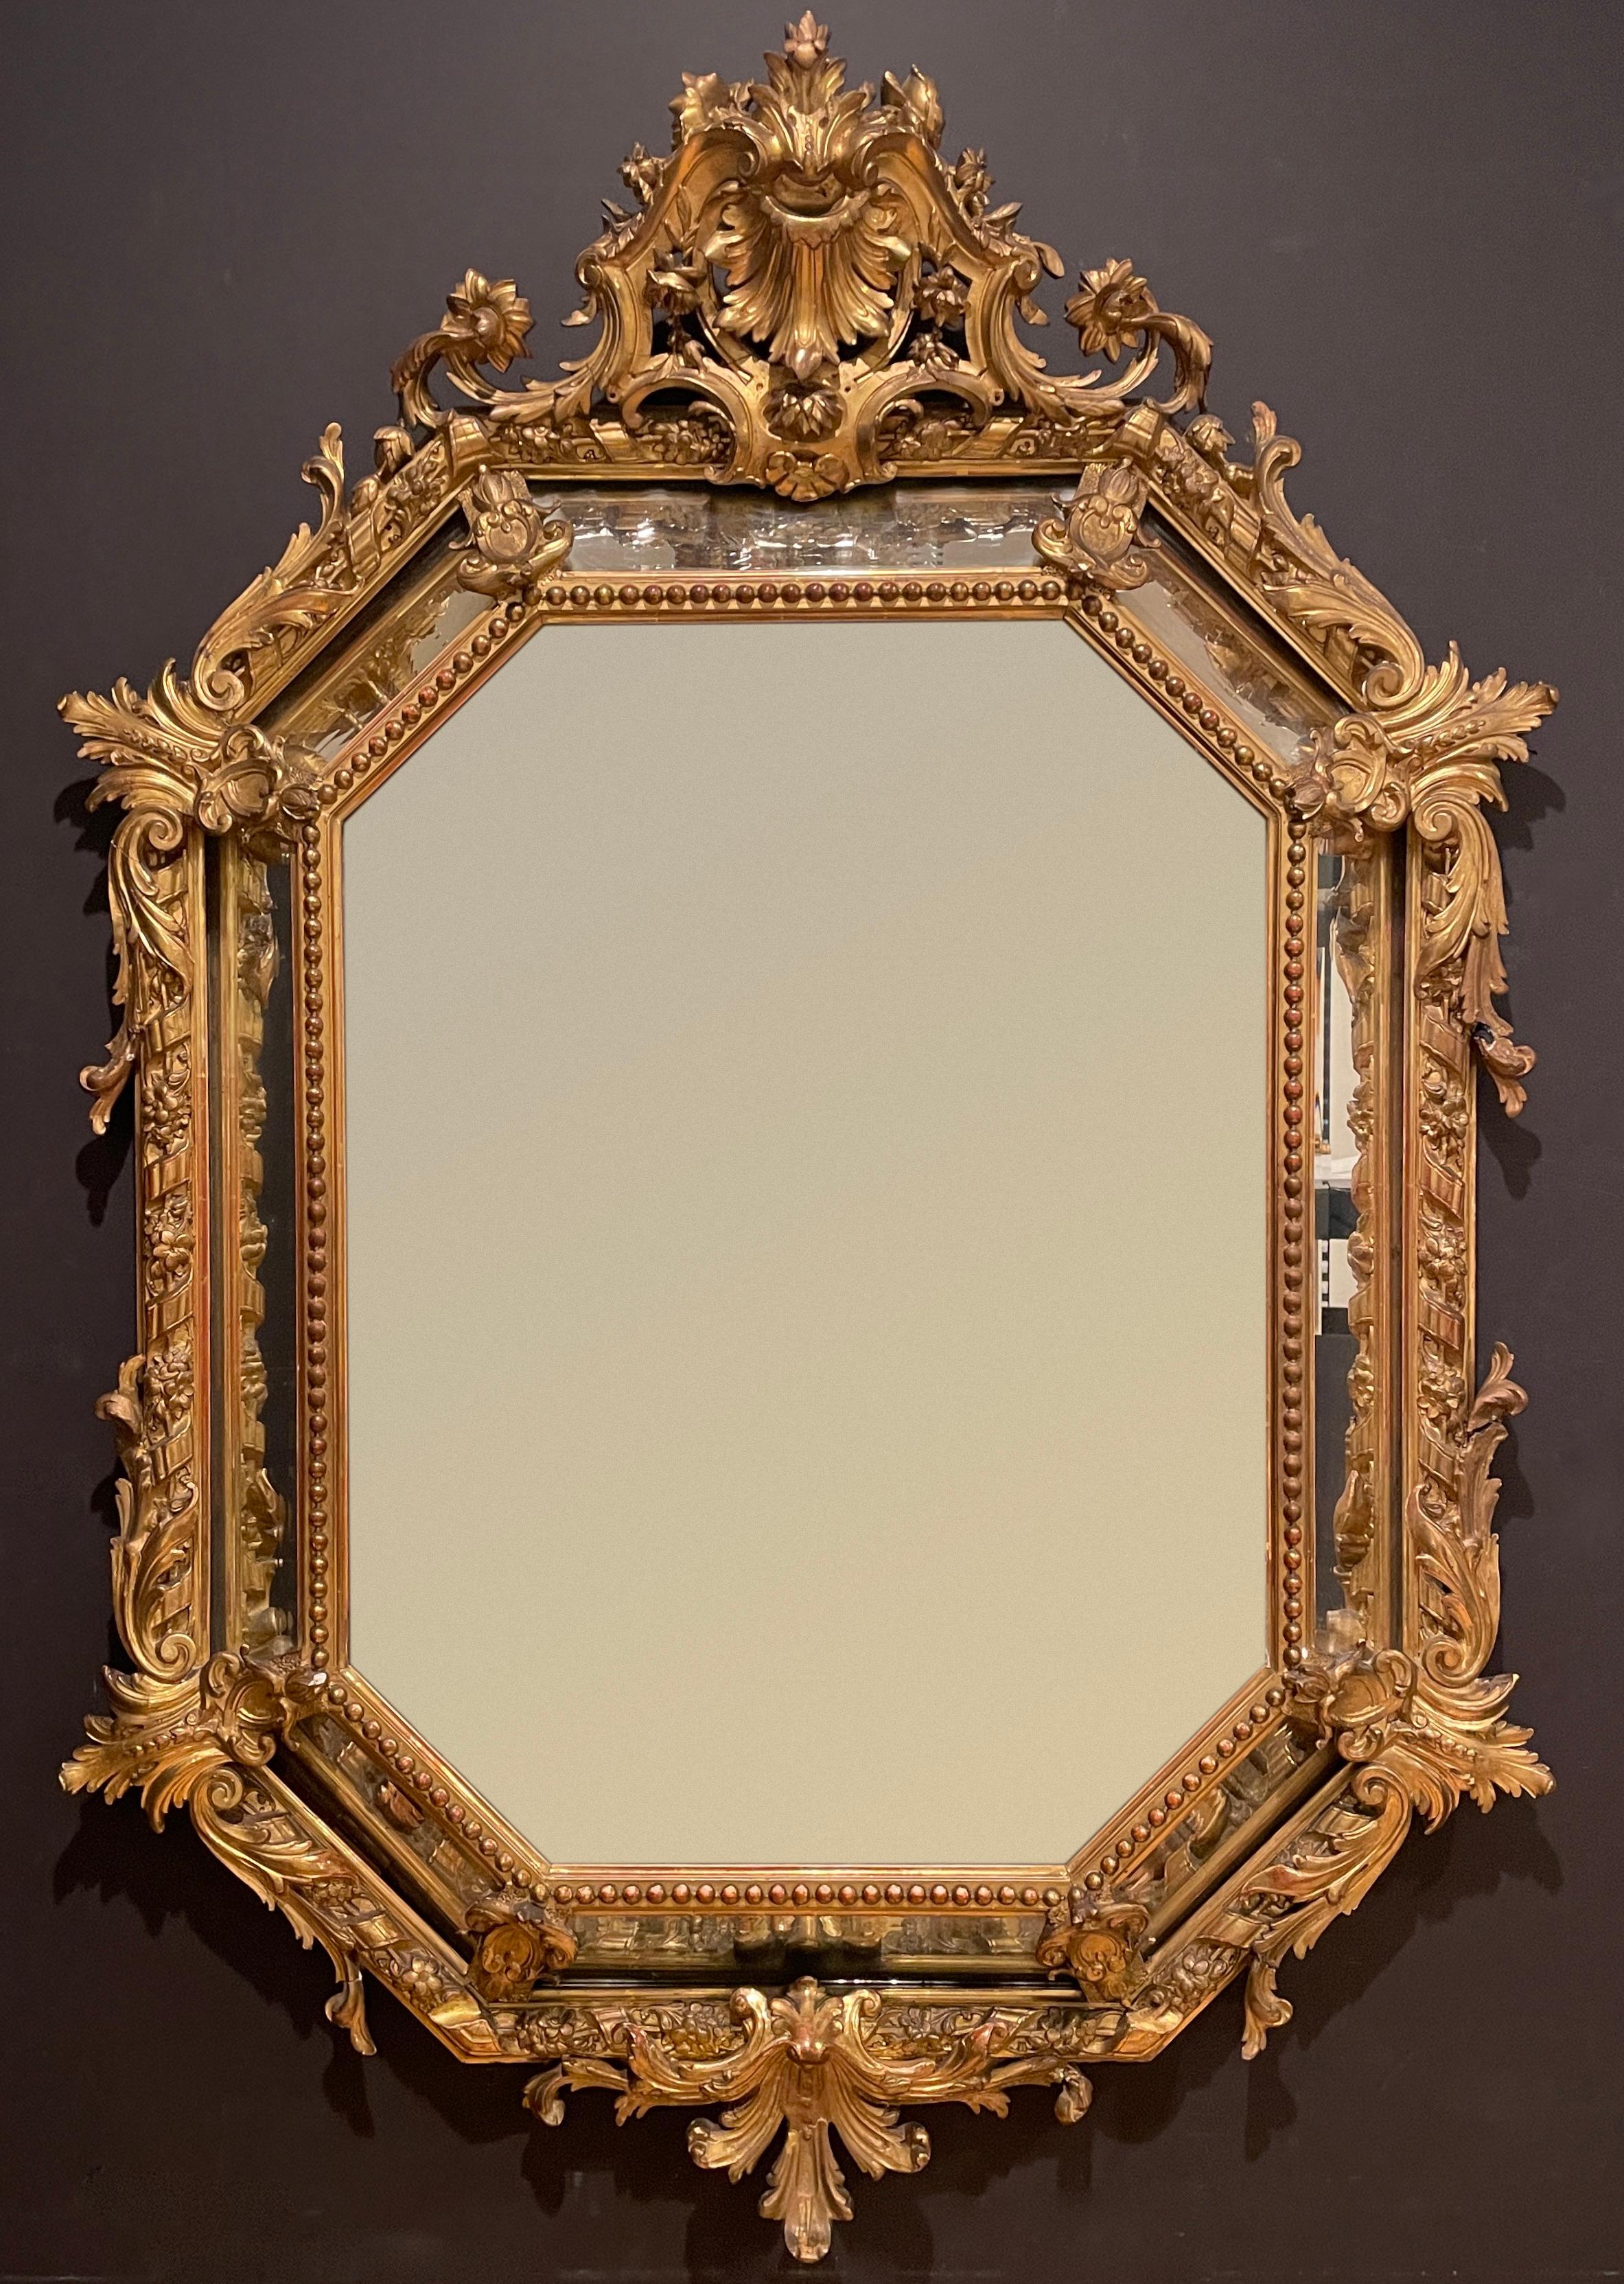 Fine quality giltwood and gesso 19th century center beveled marginal mirror of octangular shape with the makers mark P.B. and a double image. The cushion form and high relief of the elements have this mirror make a very impressive statement.